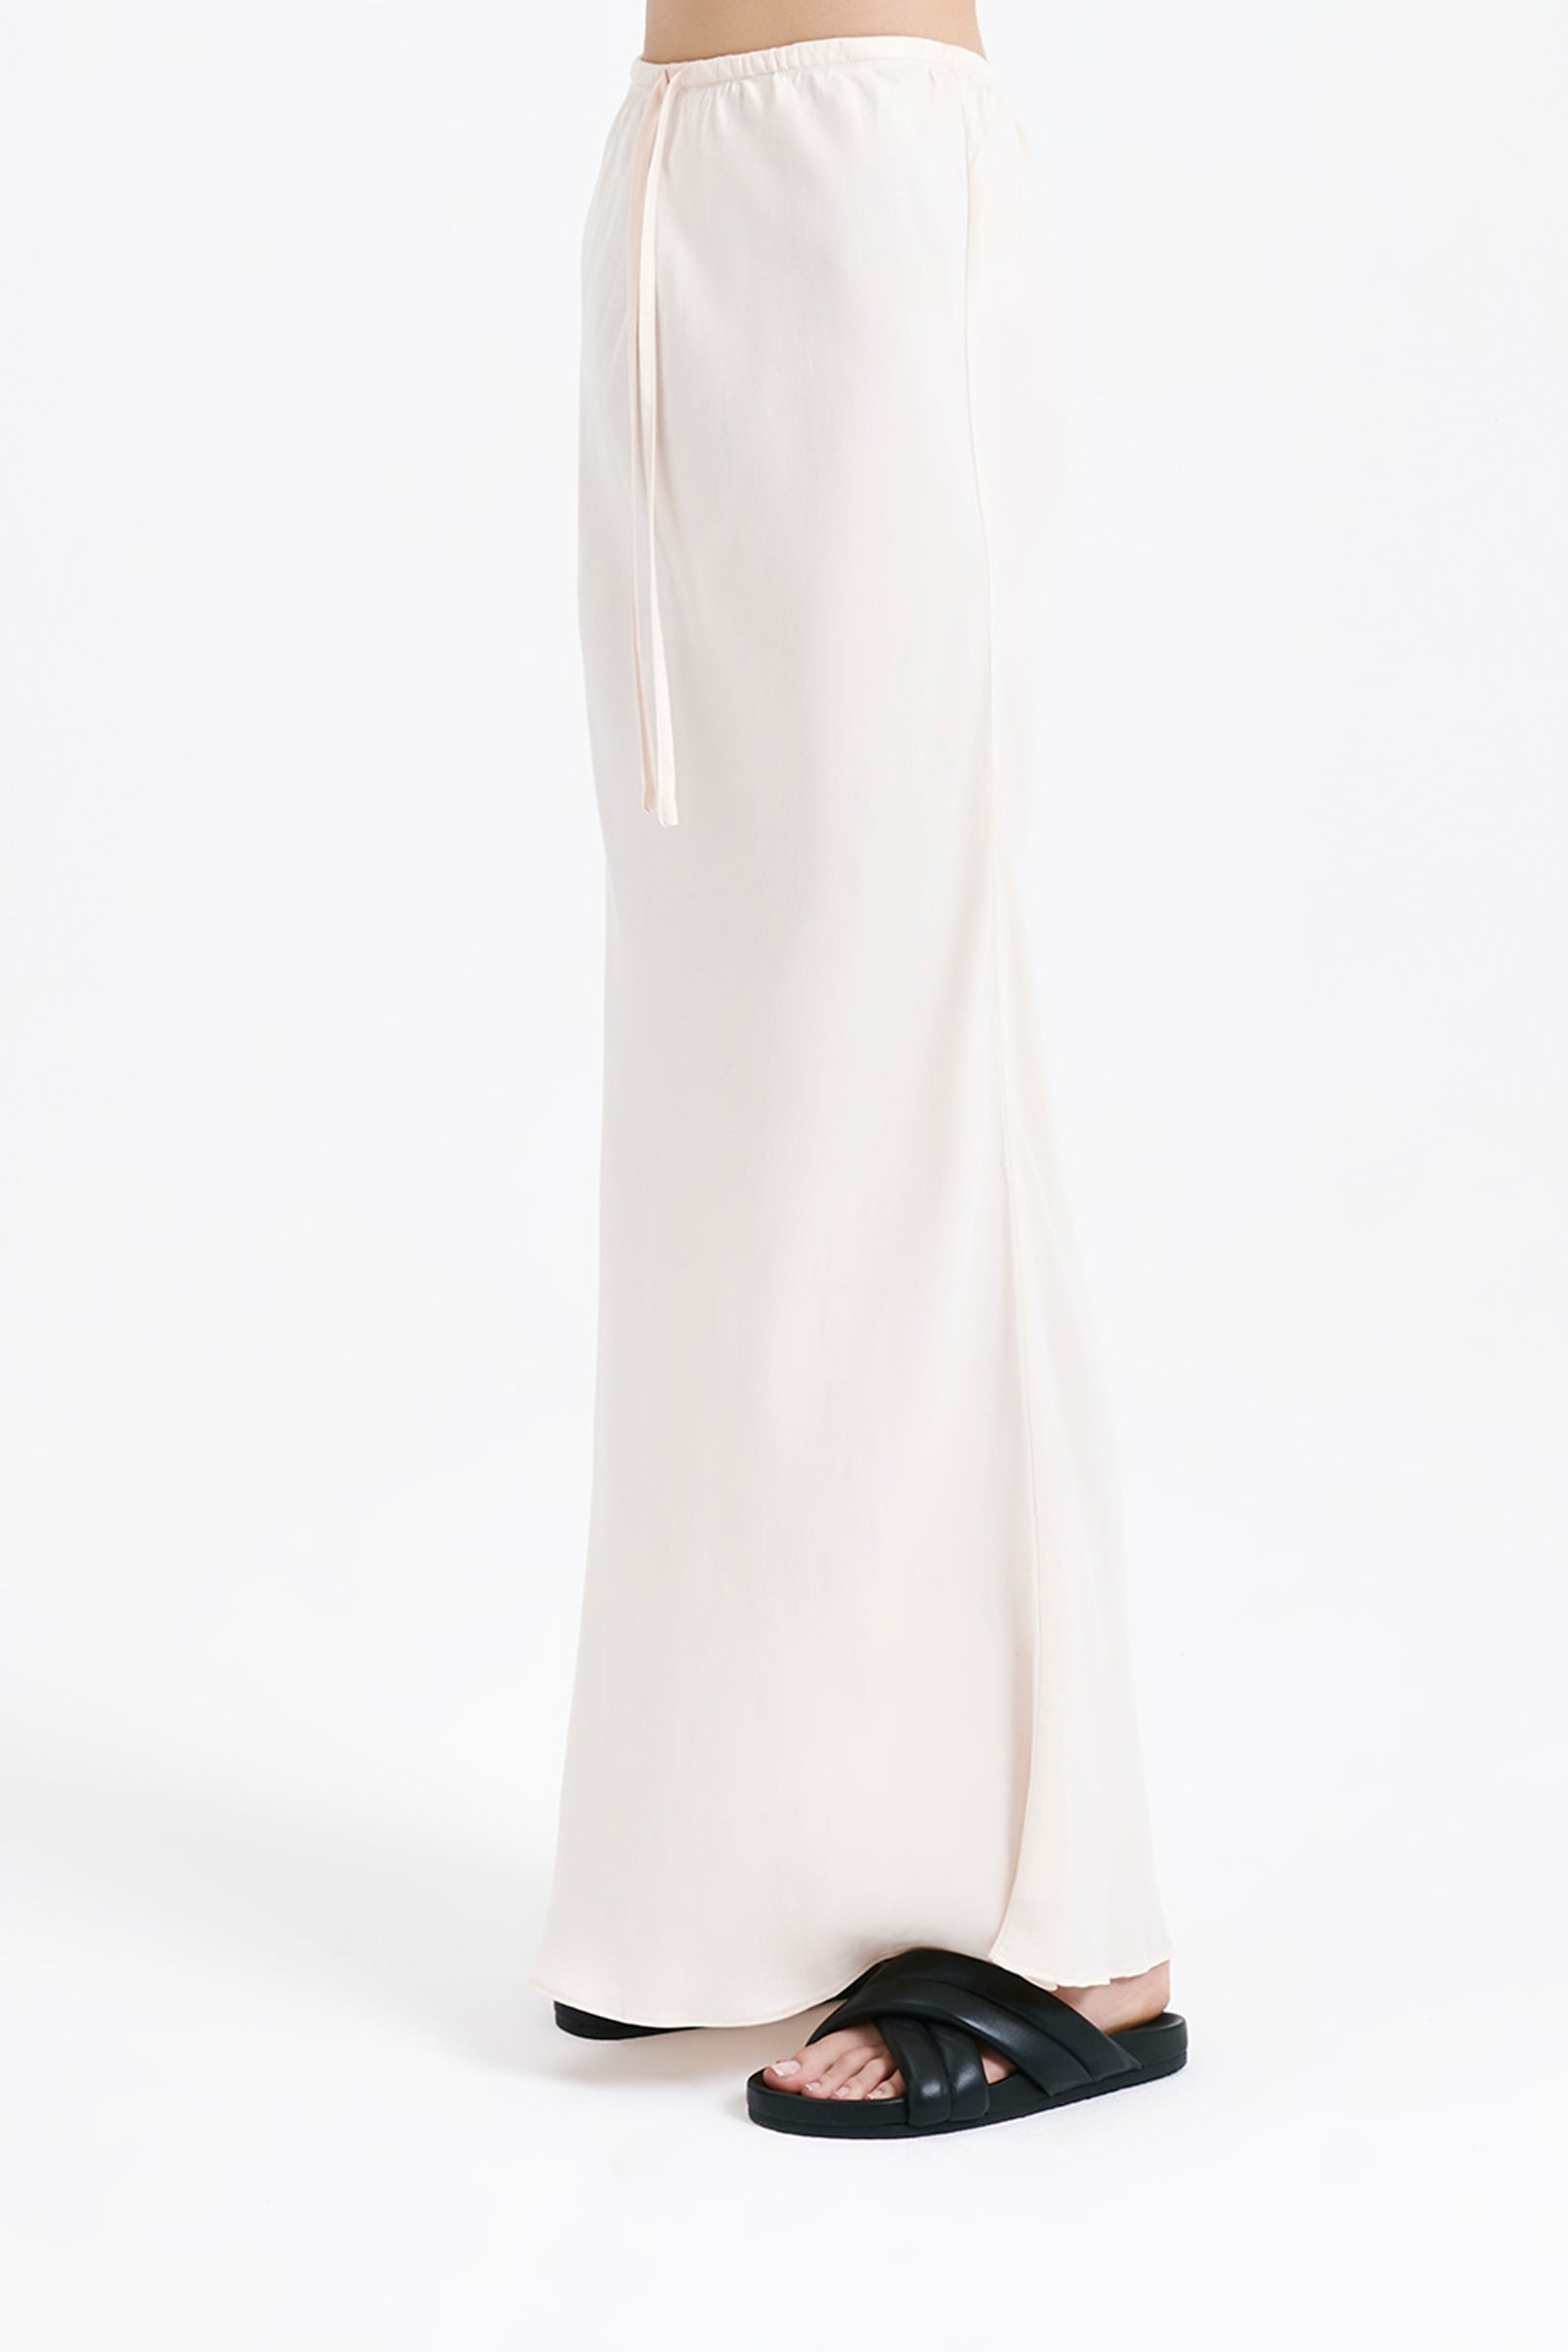 Nude Lucy Ari Cupro Skirt In White Cloud 